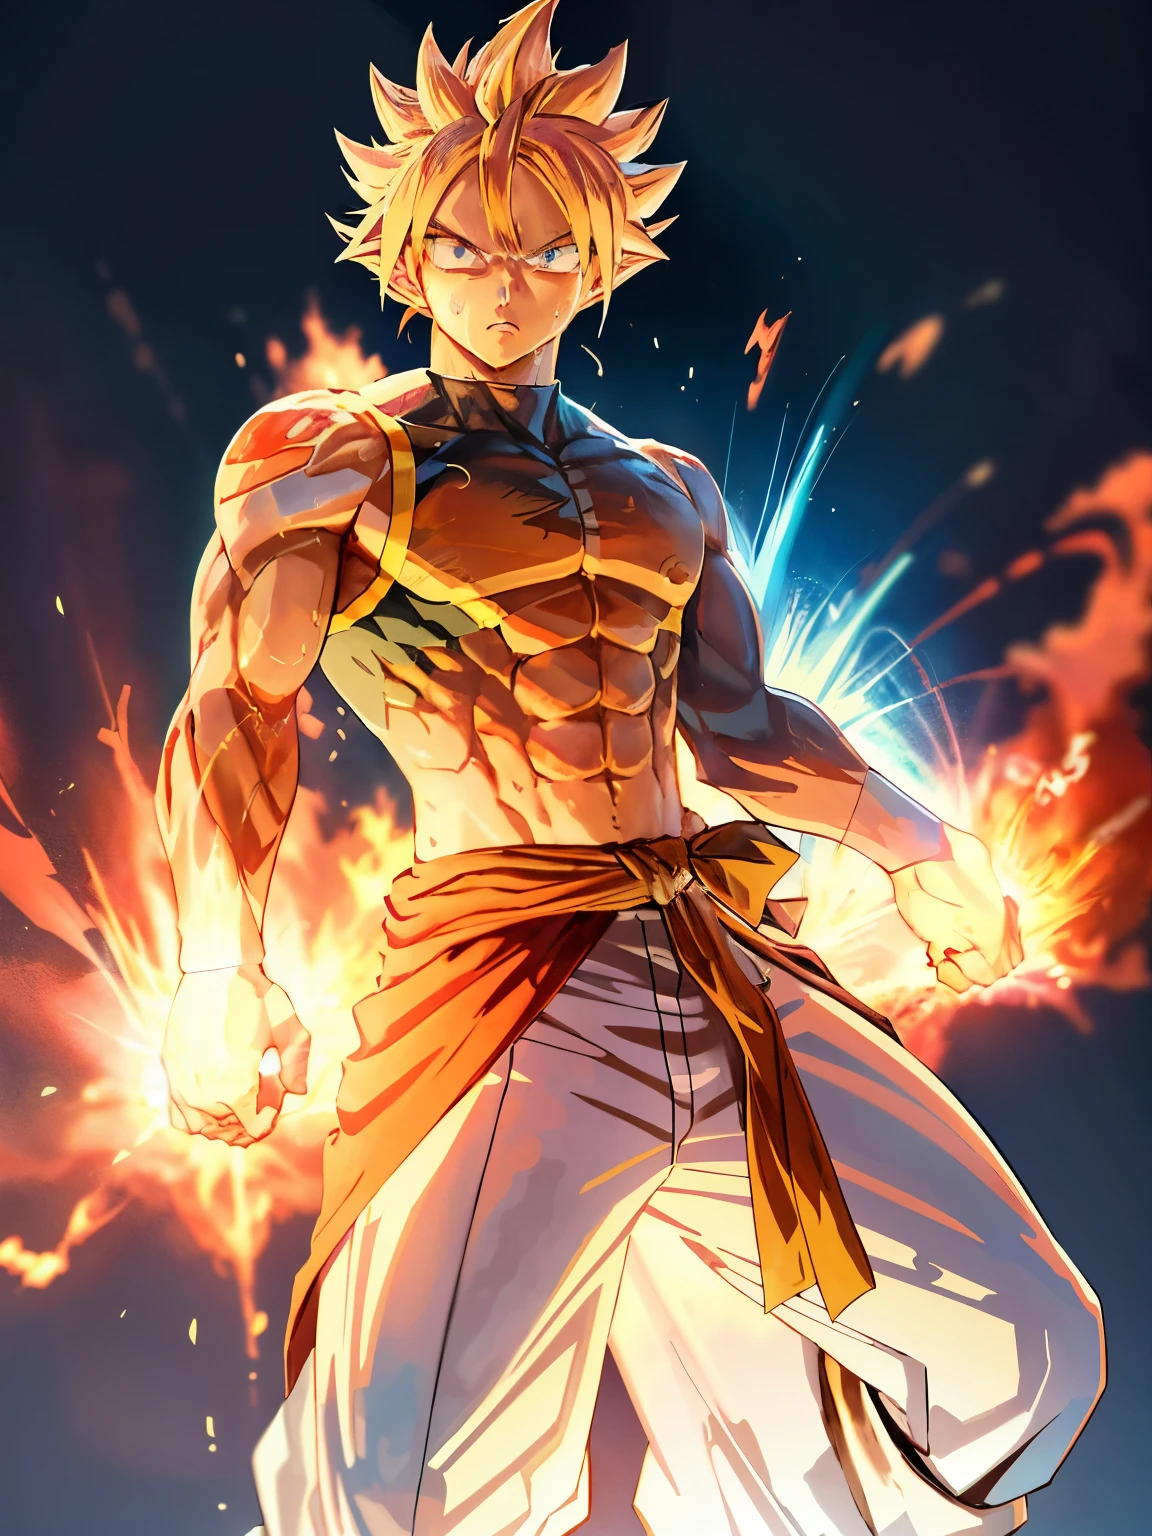 Goku in Ultra Instinct, an epic anime portrayal of an energy man, 4k manga wallpaper, super saiyan blue, anime wallpaper 4k, highly detailed portrait, human Goku, muscular build, toned abs and lean body, blonde hair standing on end, intense focus, piercing blue eyes, powerful aura, exaggerated muscular definition, every vein and muscle fibre popping out, sweat dripping from his body, determined expression, Ultra Instinct aura emanating from his being.